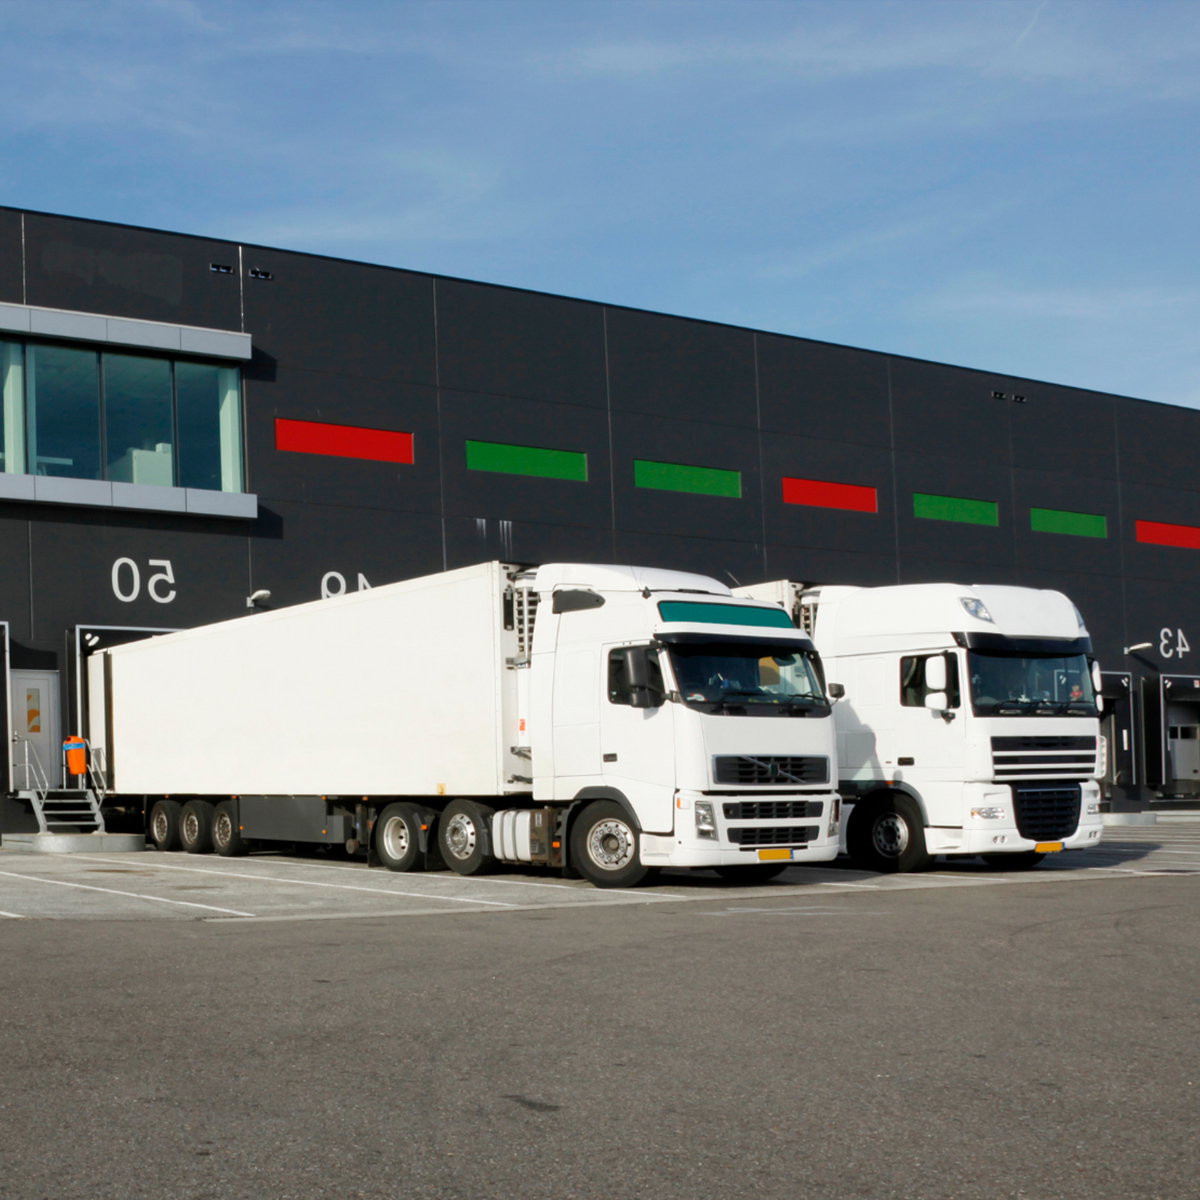 Two lorries on a loading bay, illustrating logistics and transportation operations